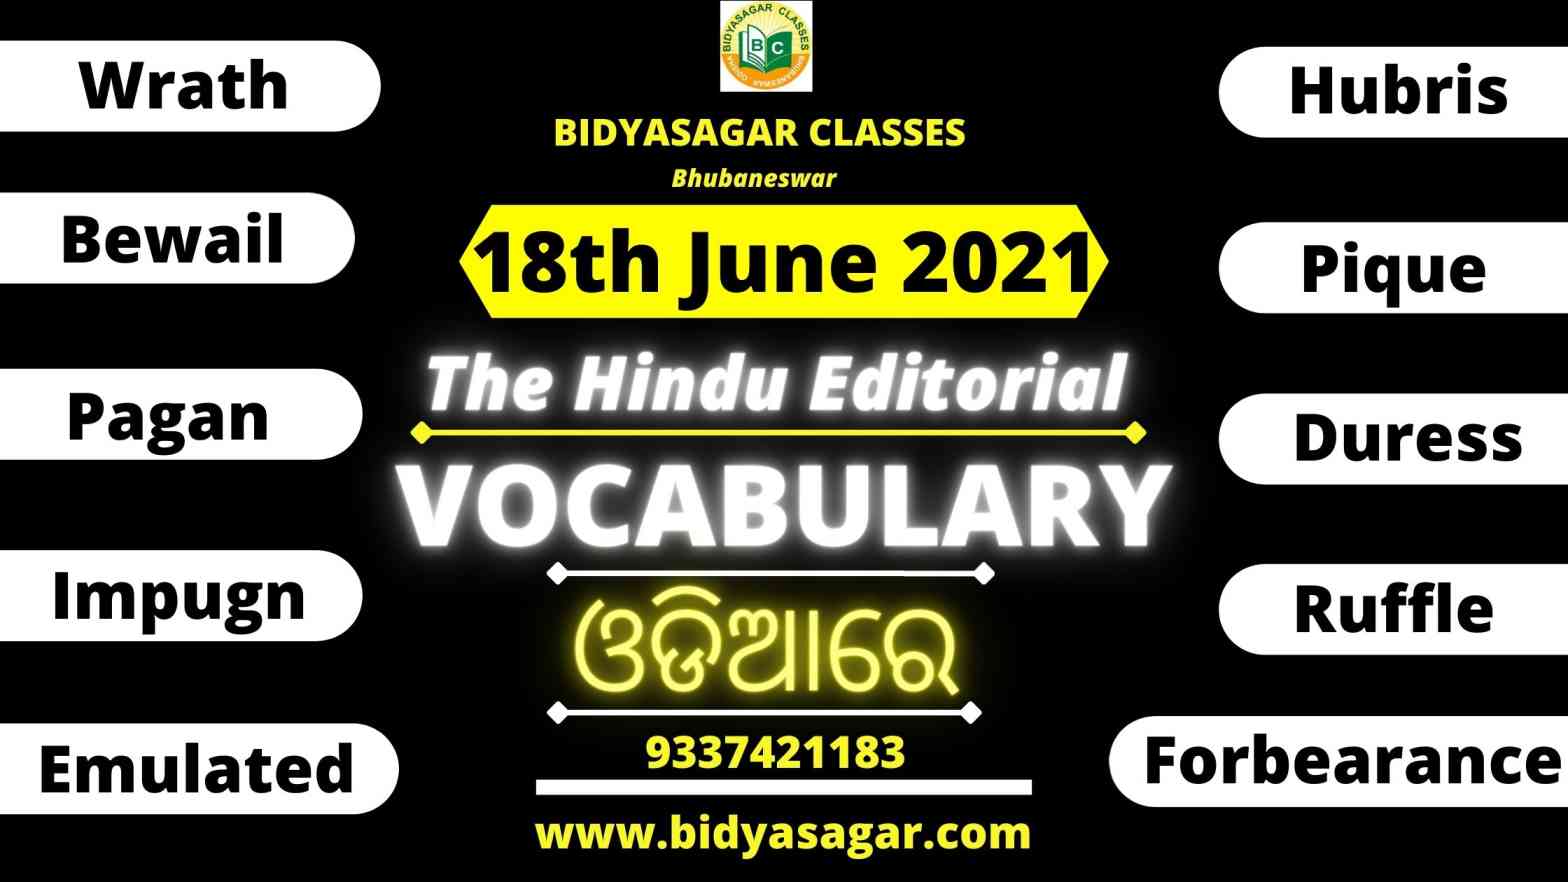 The Hindu Editorial Vocabulary of 18th June 2021